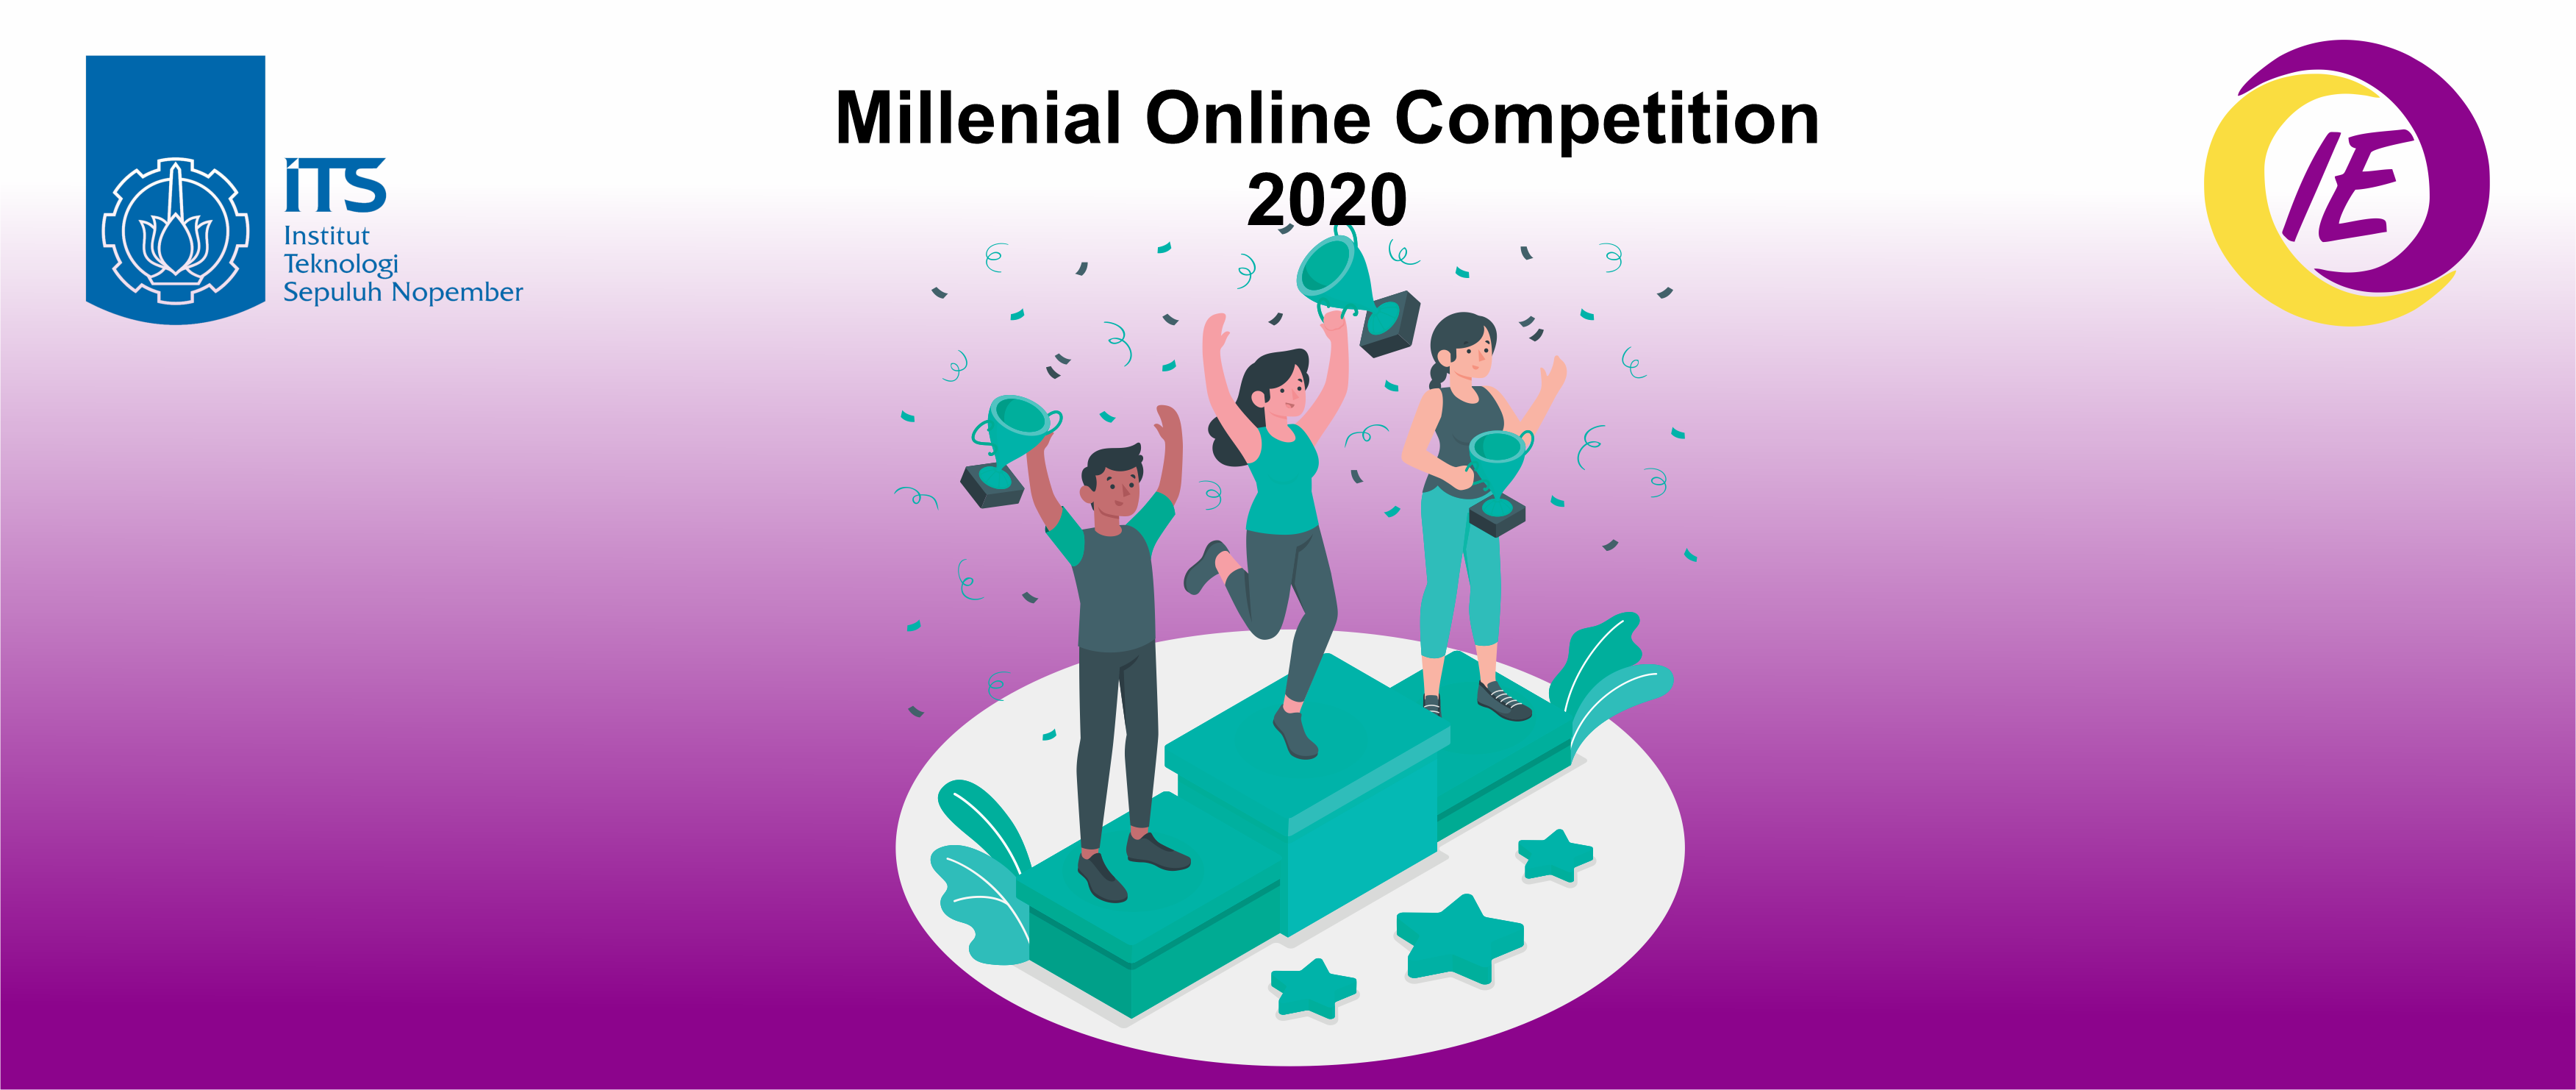 Competitions 2020. Флаг м Competition. Disney competitors 2020.